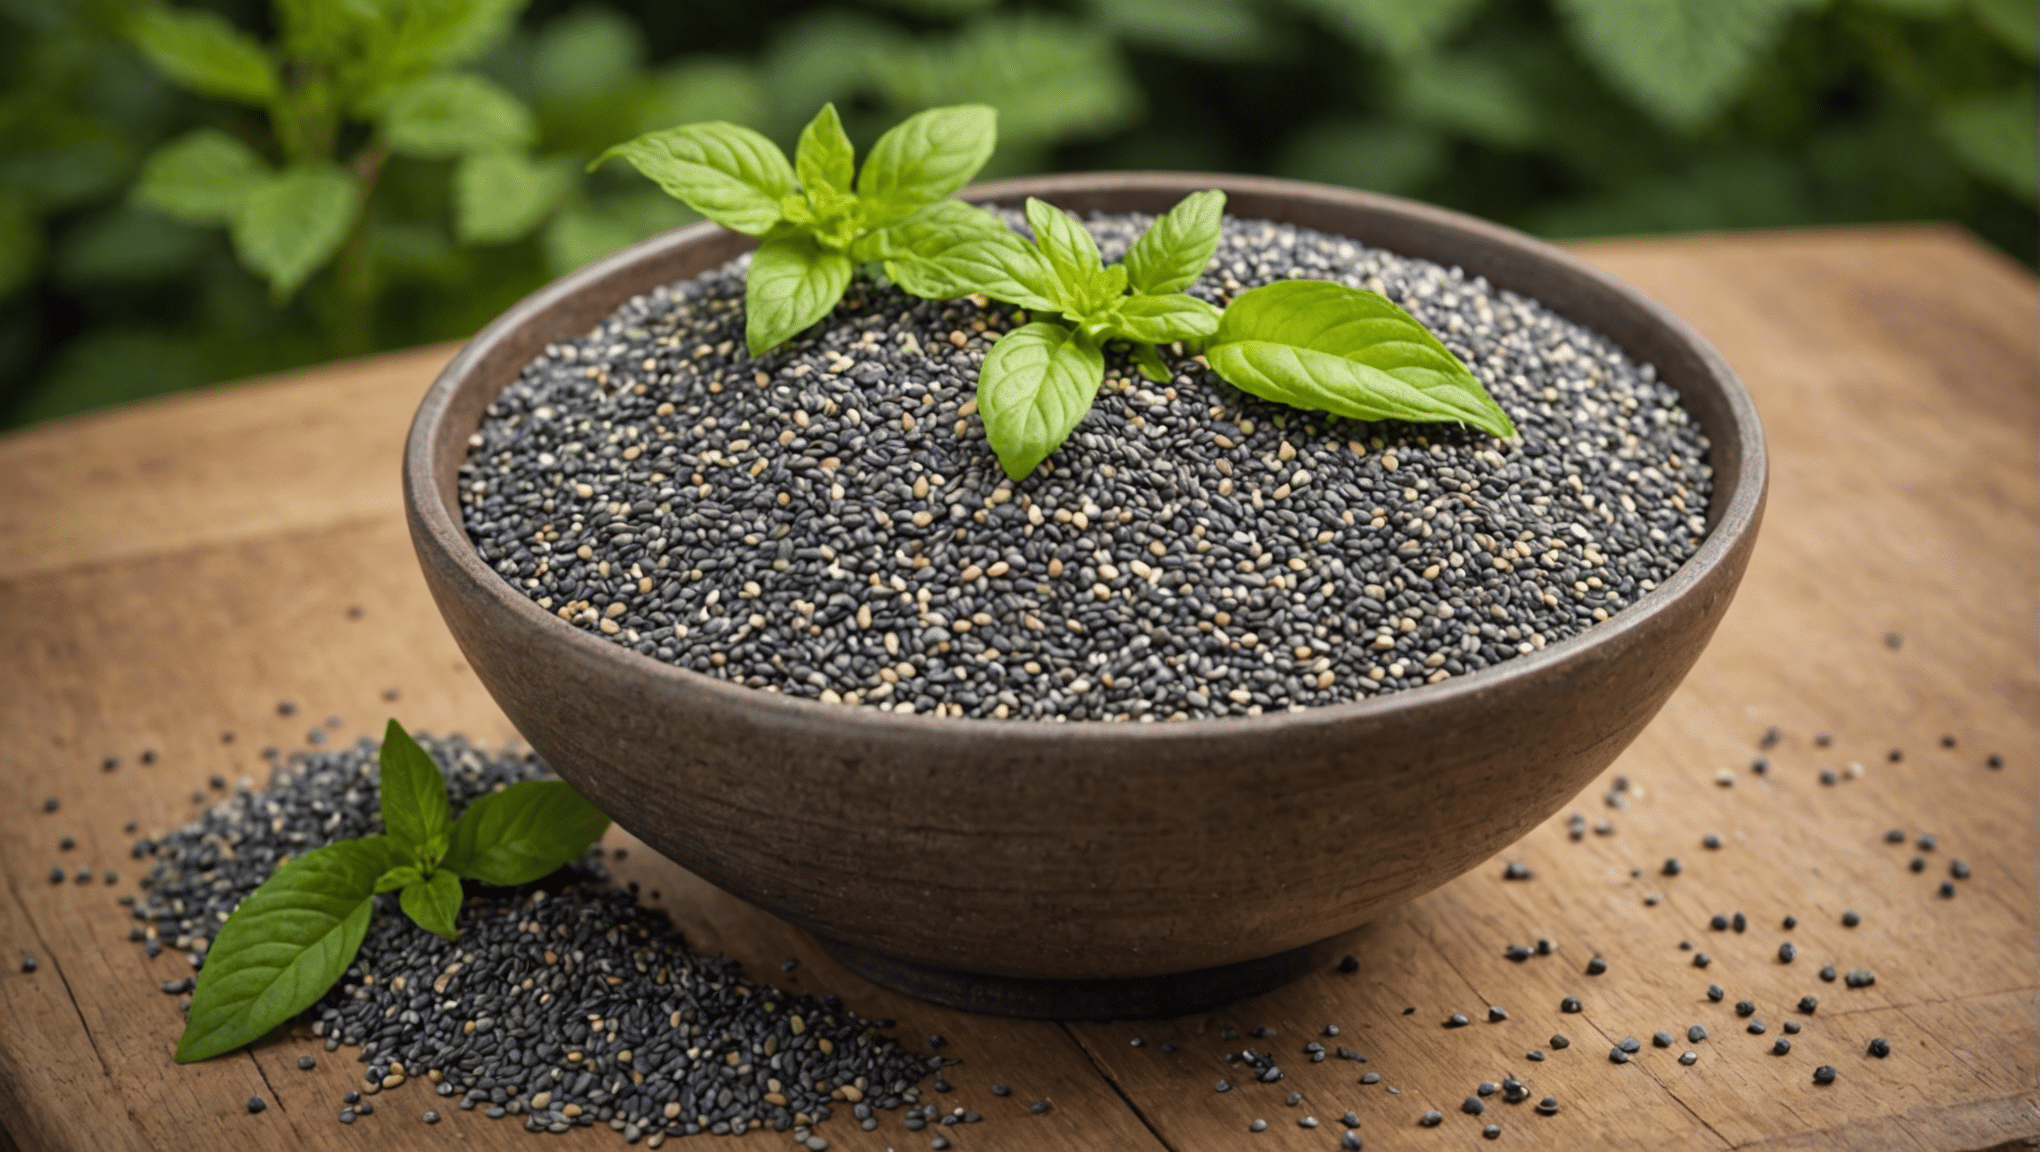 learn about the shelf life of chia seeds and whether they expire. find out how to store chia seeds properly to maintain their freshness and nutritional value.